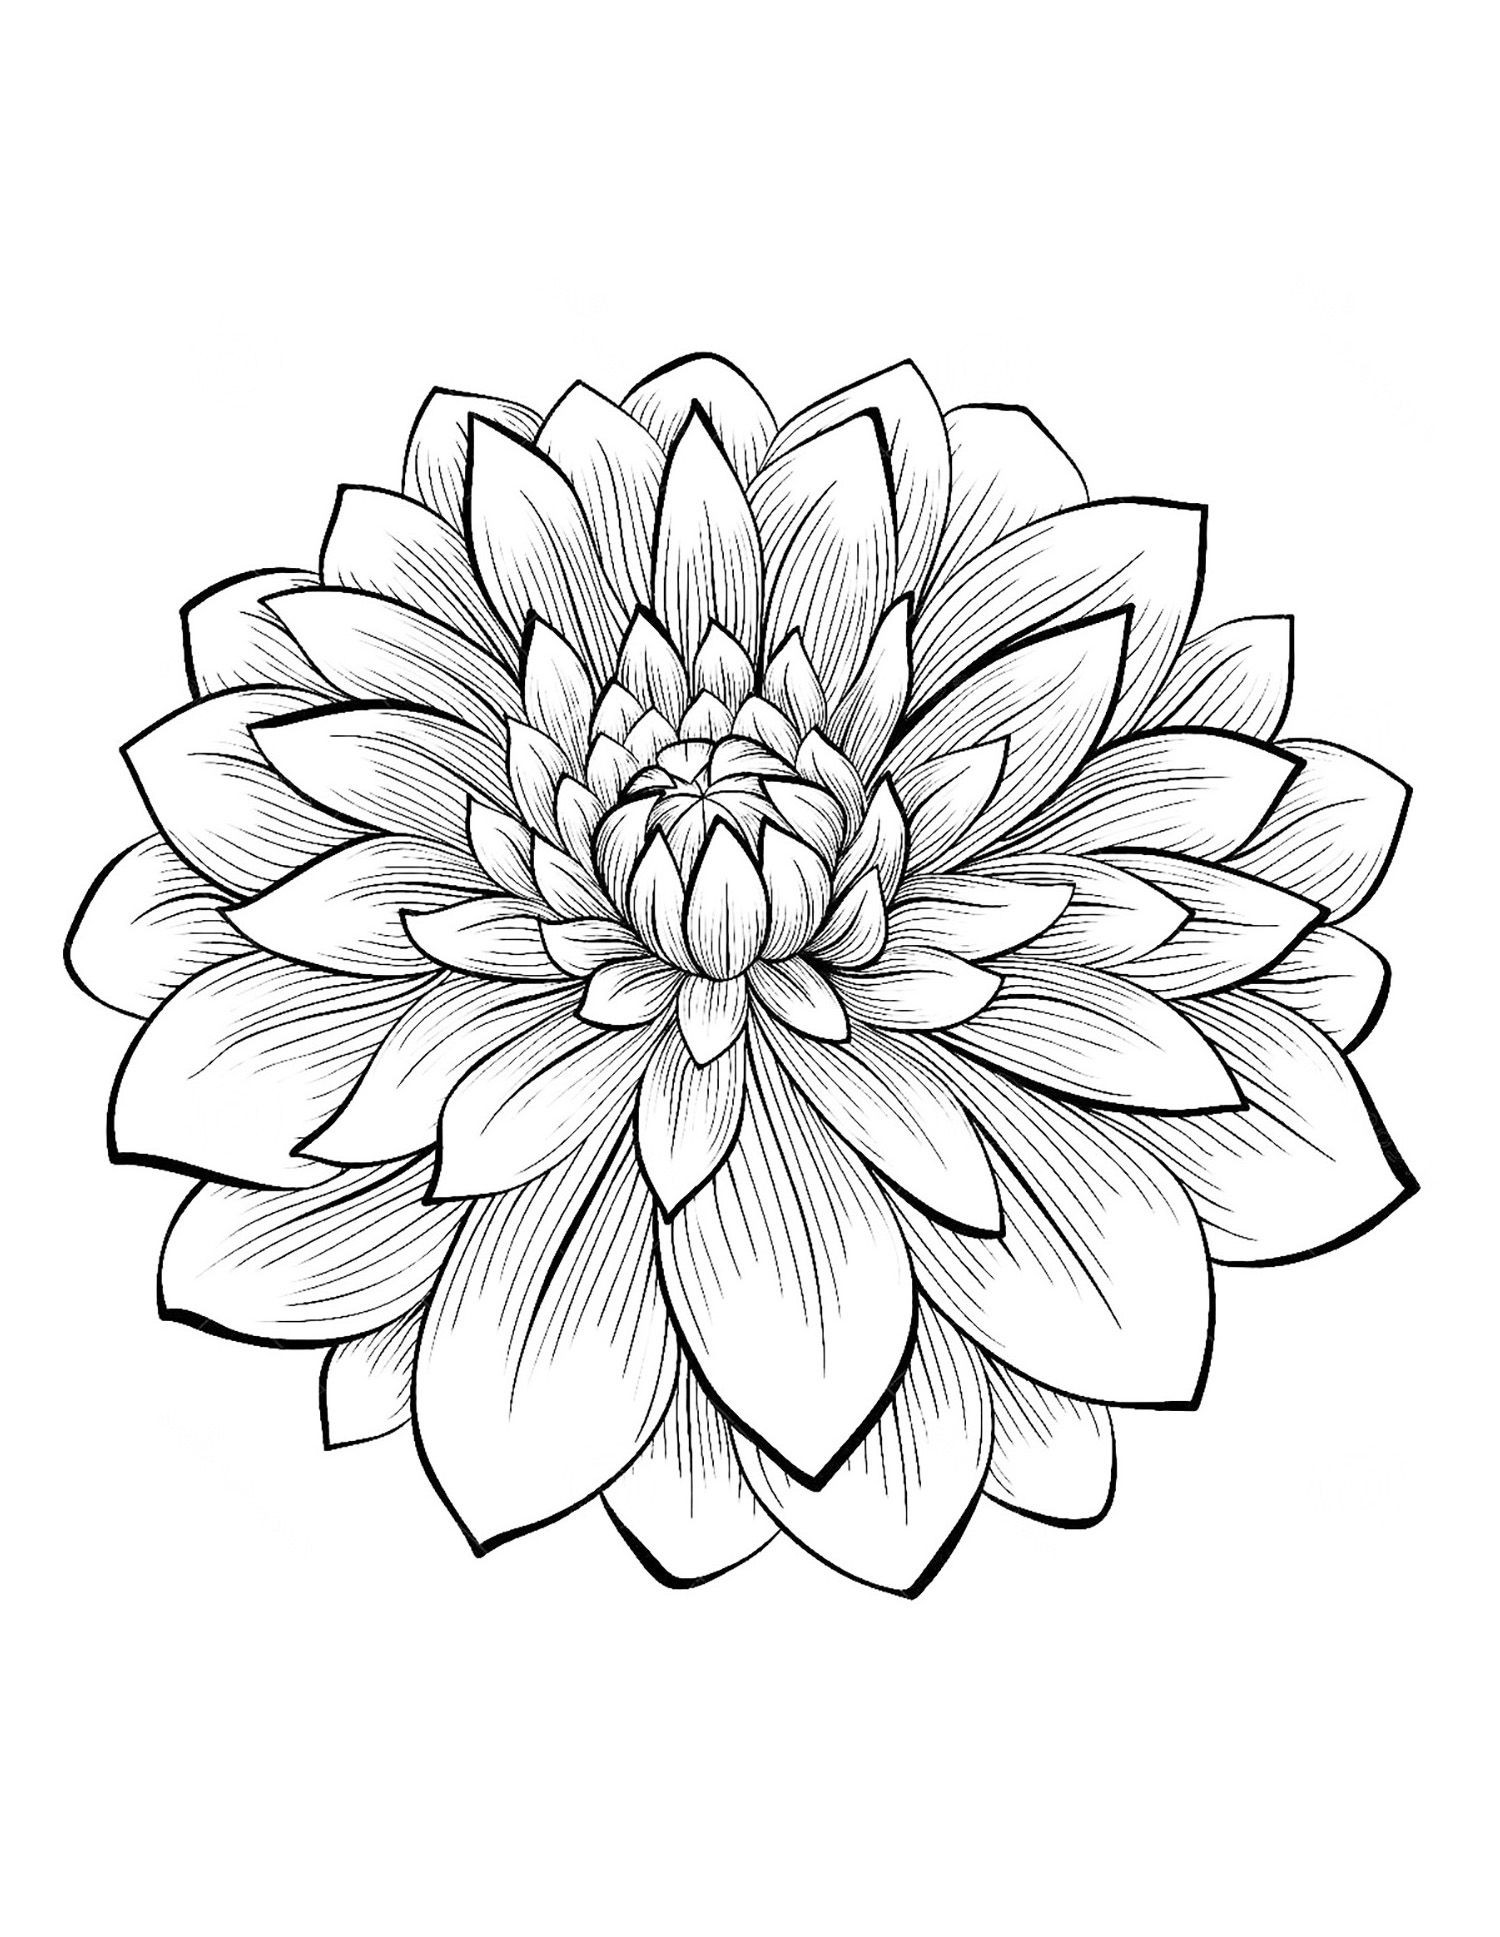 Adult Flower Coloring Pages
 Dahlia color one of the most beautiful flowers From the